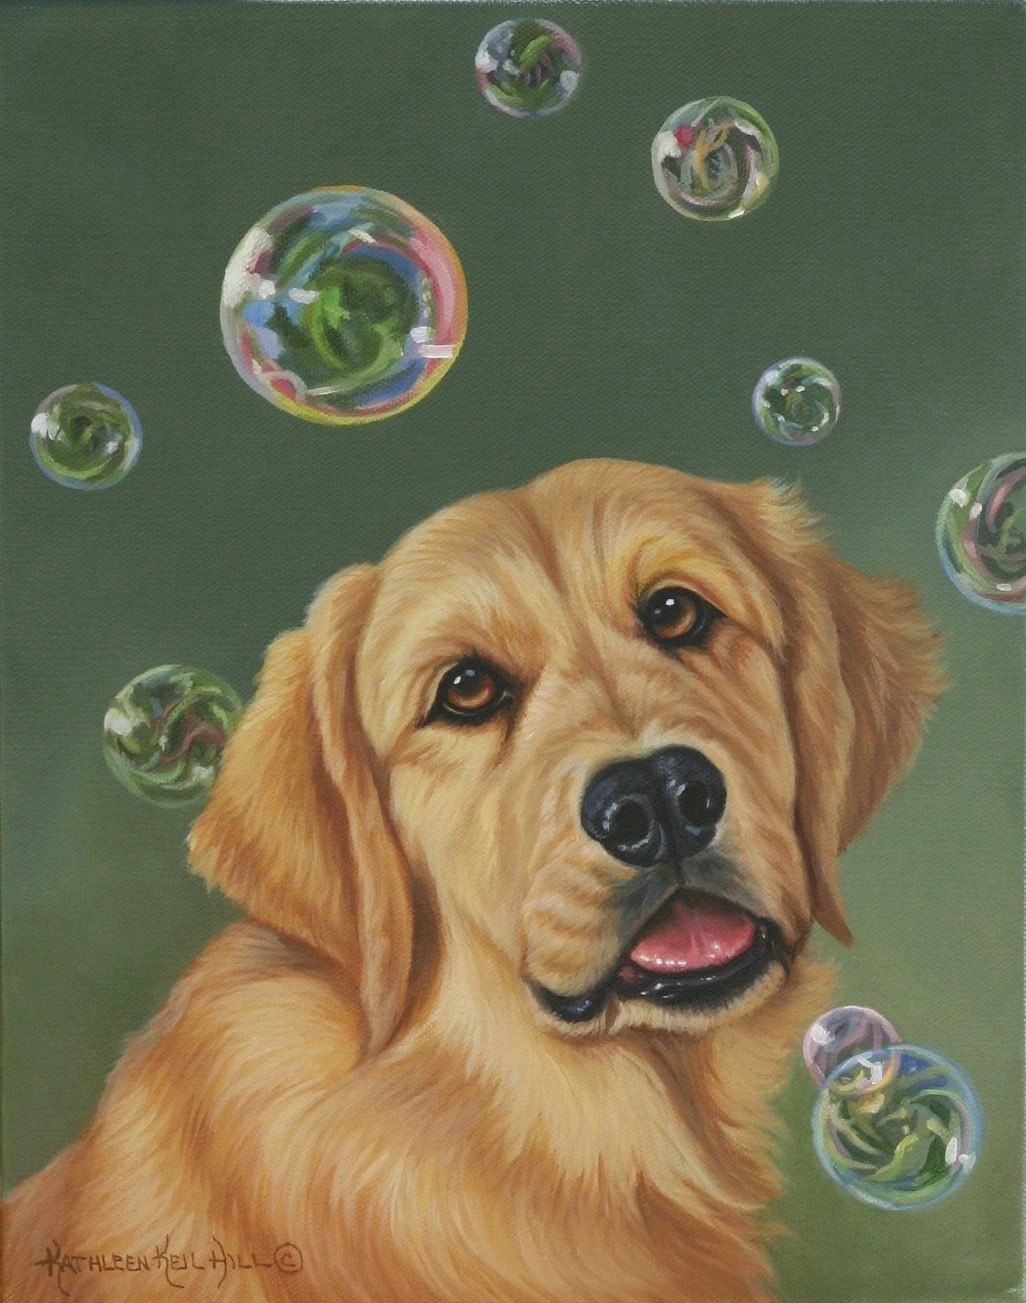 Drawing A Dog Golden Retriever Tiny Bubbles A Portrait Of A Golden Retriever Puppy and His First